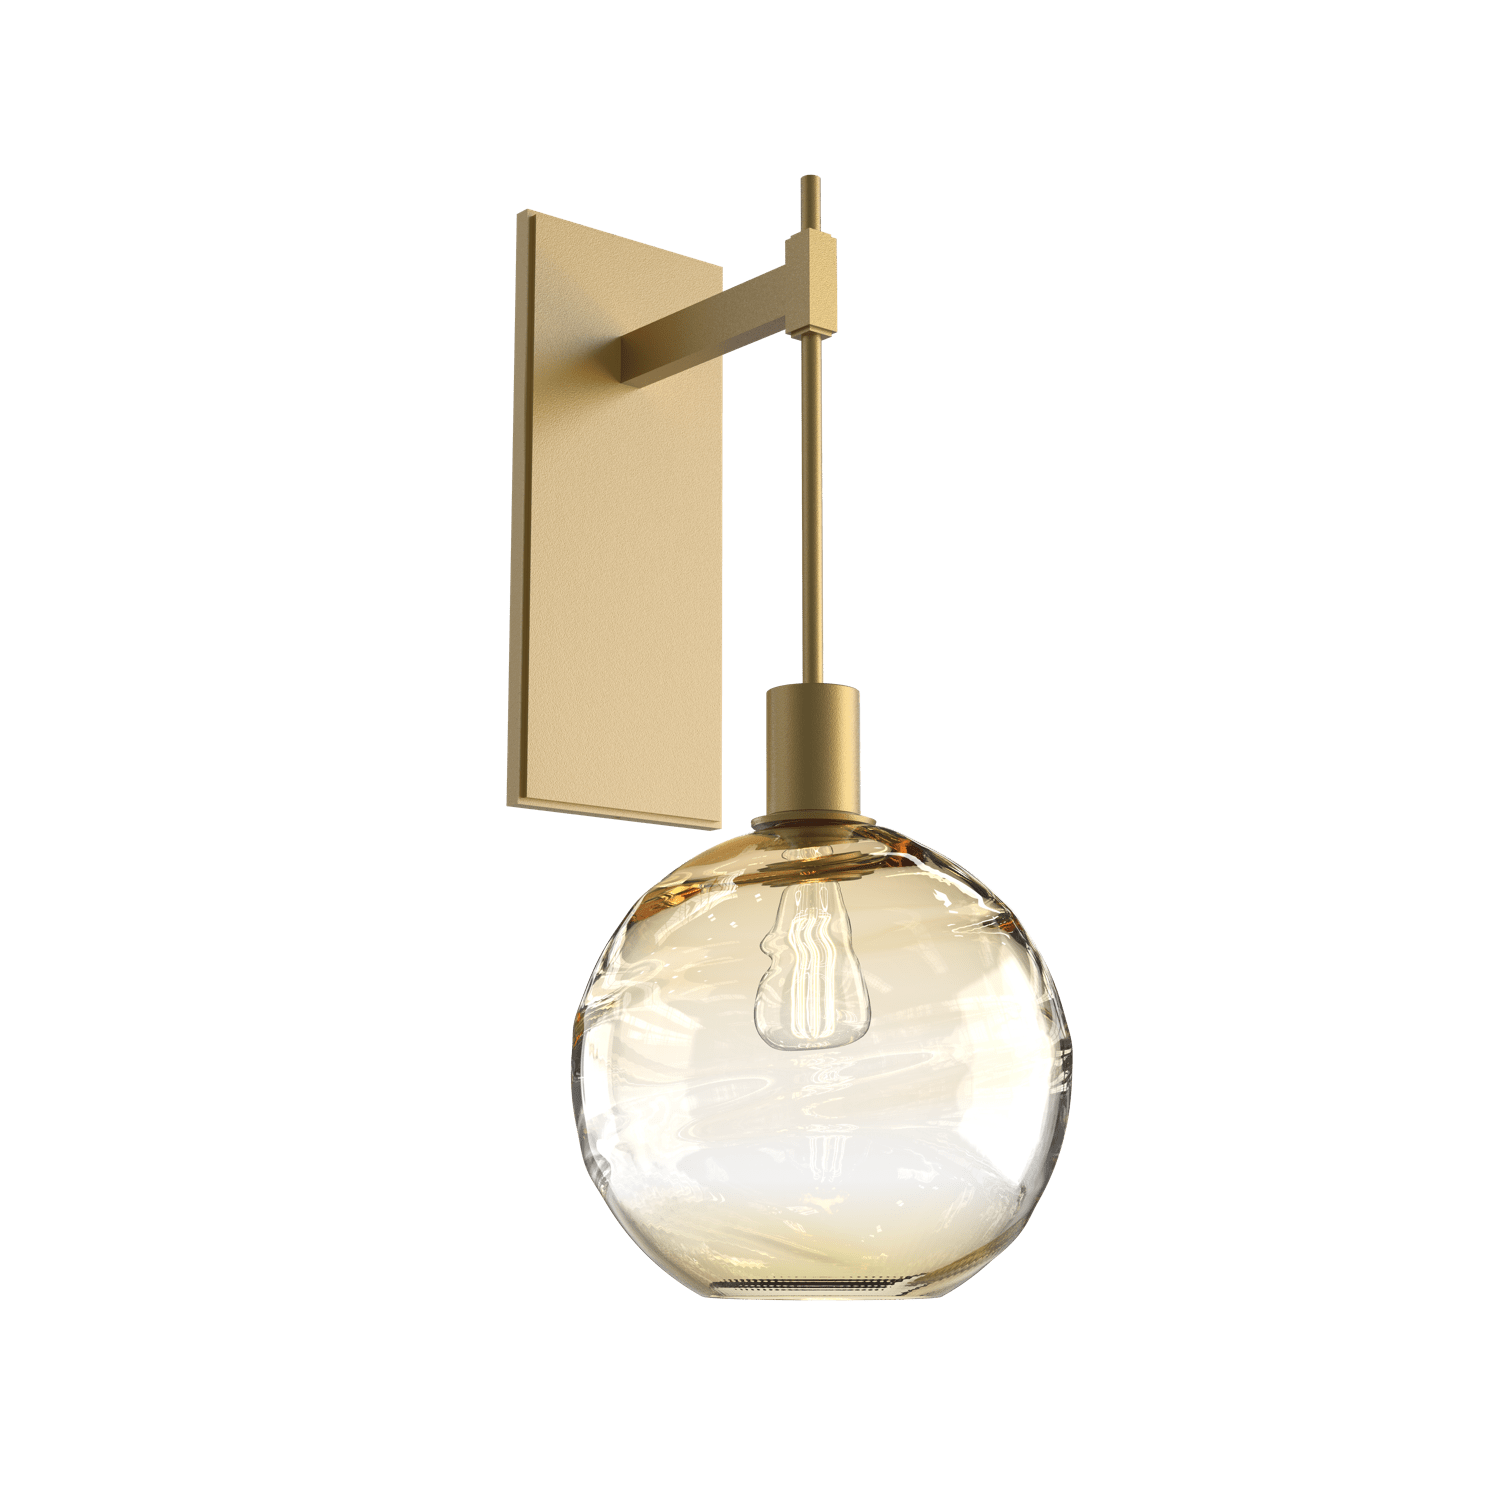 IDB0047-22-GB-OA-Hammerton-Studio-Optic-Blown-Glass-Terra-tempo-wall-sconce-with-gilded-brass-finish-and-optic-amber-blown-glass-shades-and-incandescent-lamping